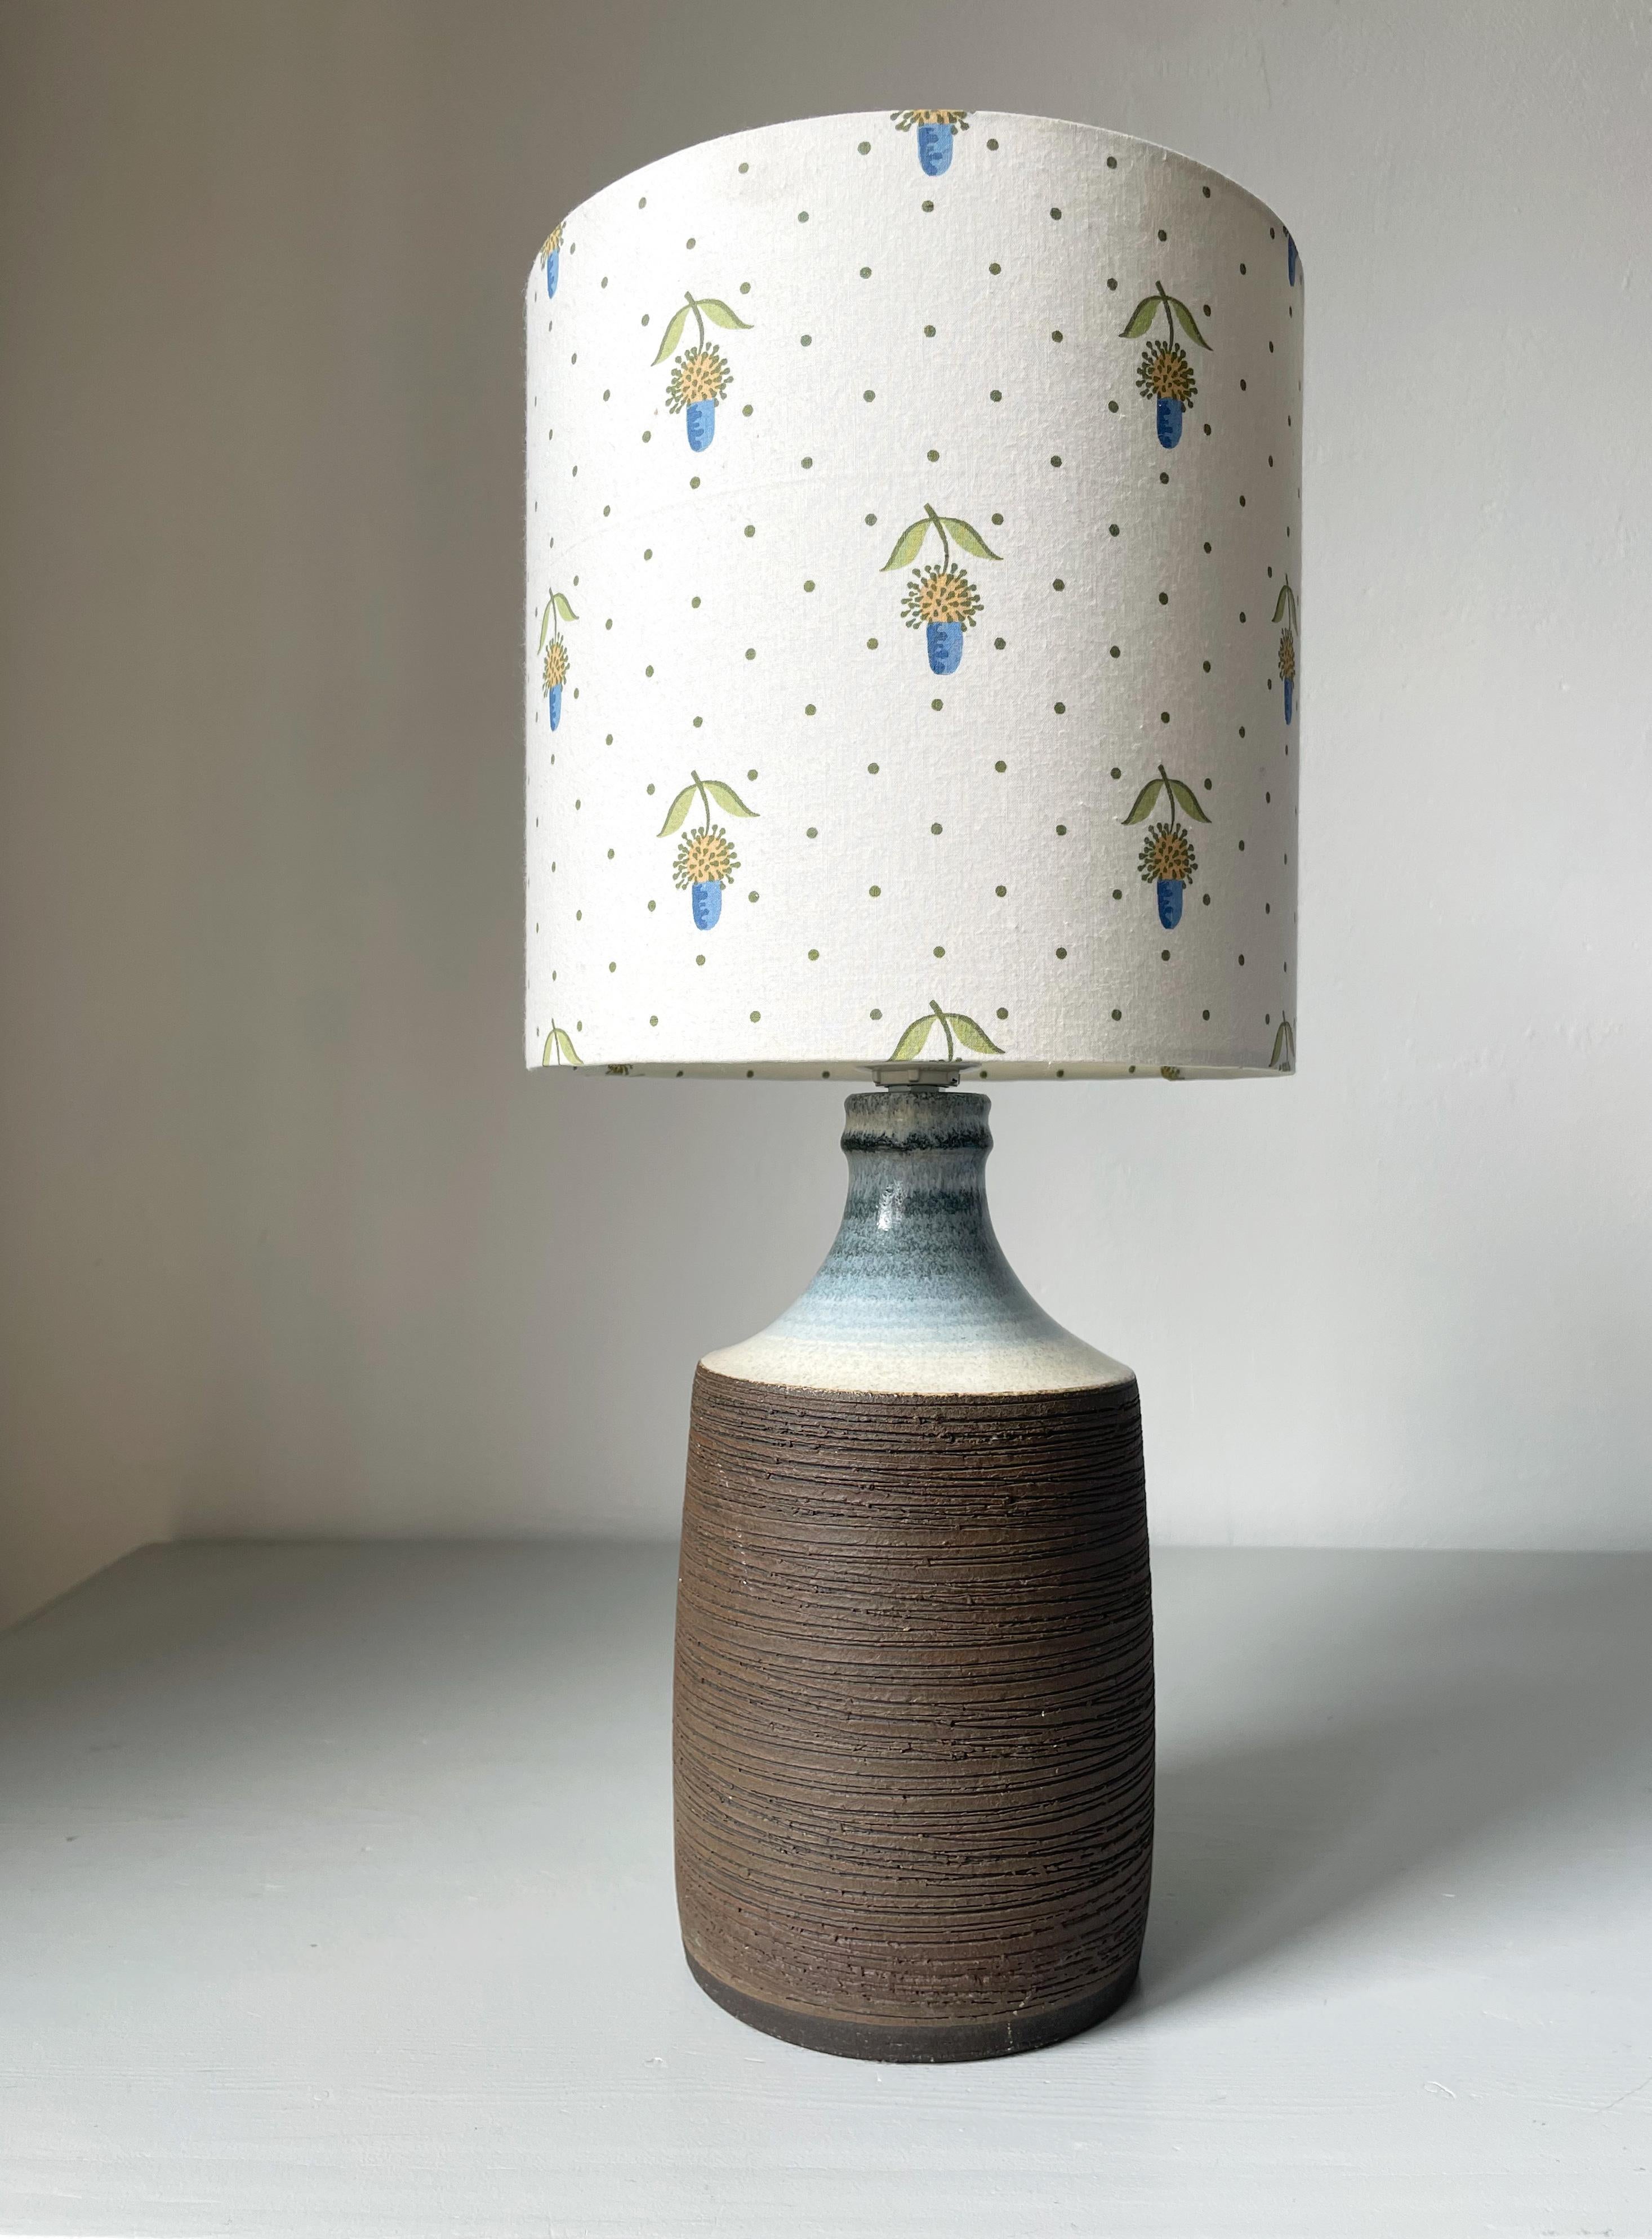 Modernist handmade table lamp with raw ceramic lined textured body and glazed neck in blue and white colors. Rewired. Stamped under base. Shade not included. Beautiful vintage condition. 
Denmark, 1970s. 
Height without shade: 29 cm / 11.4 inches.